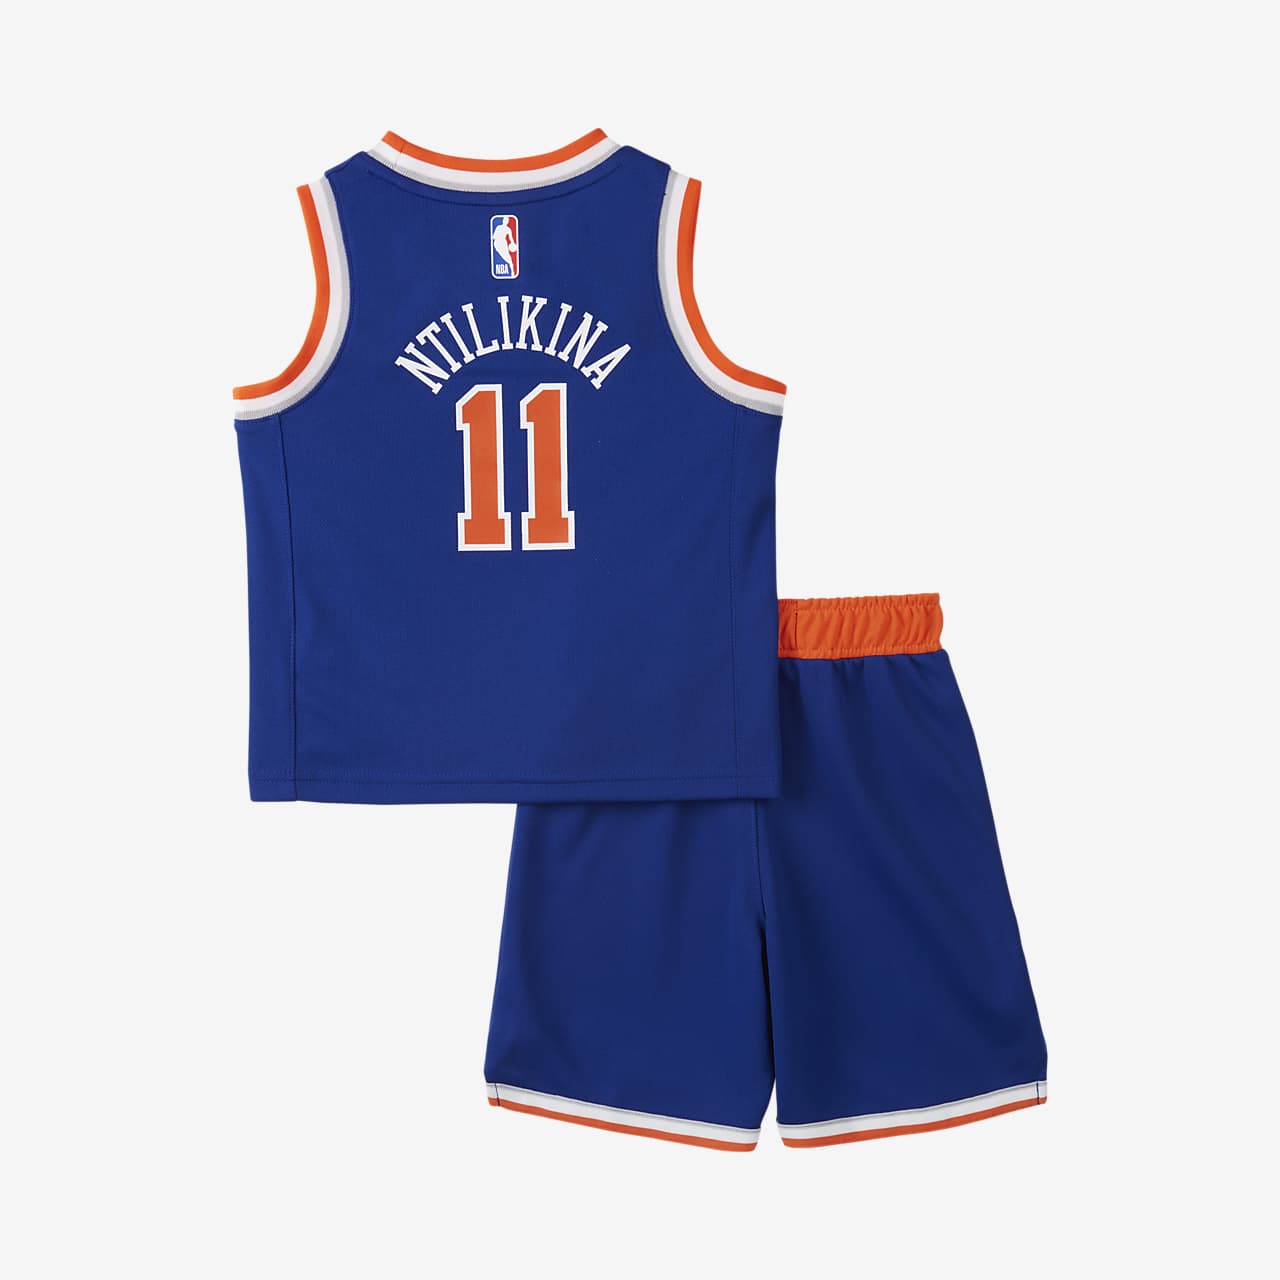 Toddlers' Nike NBA Jersey and Shorts 